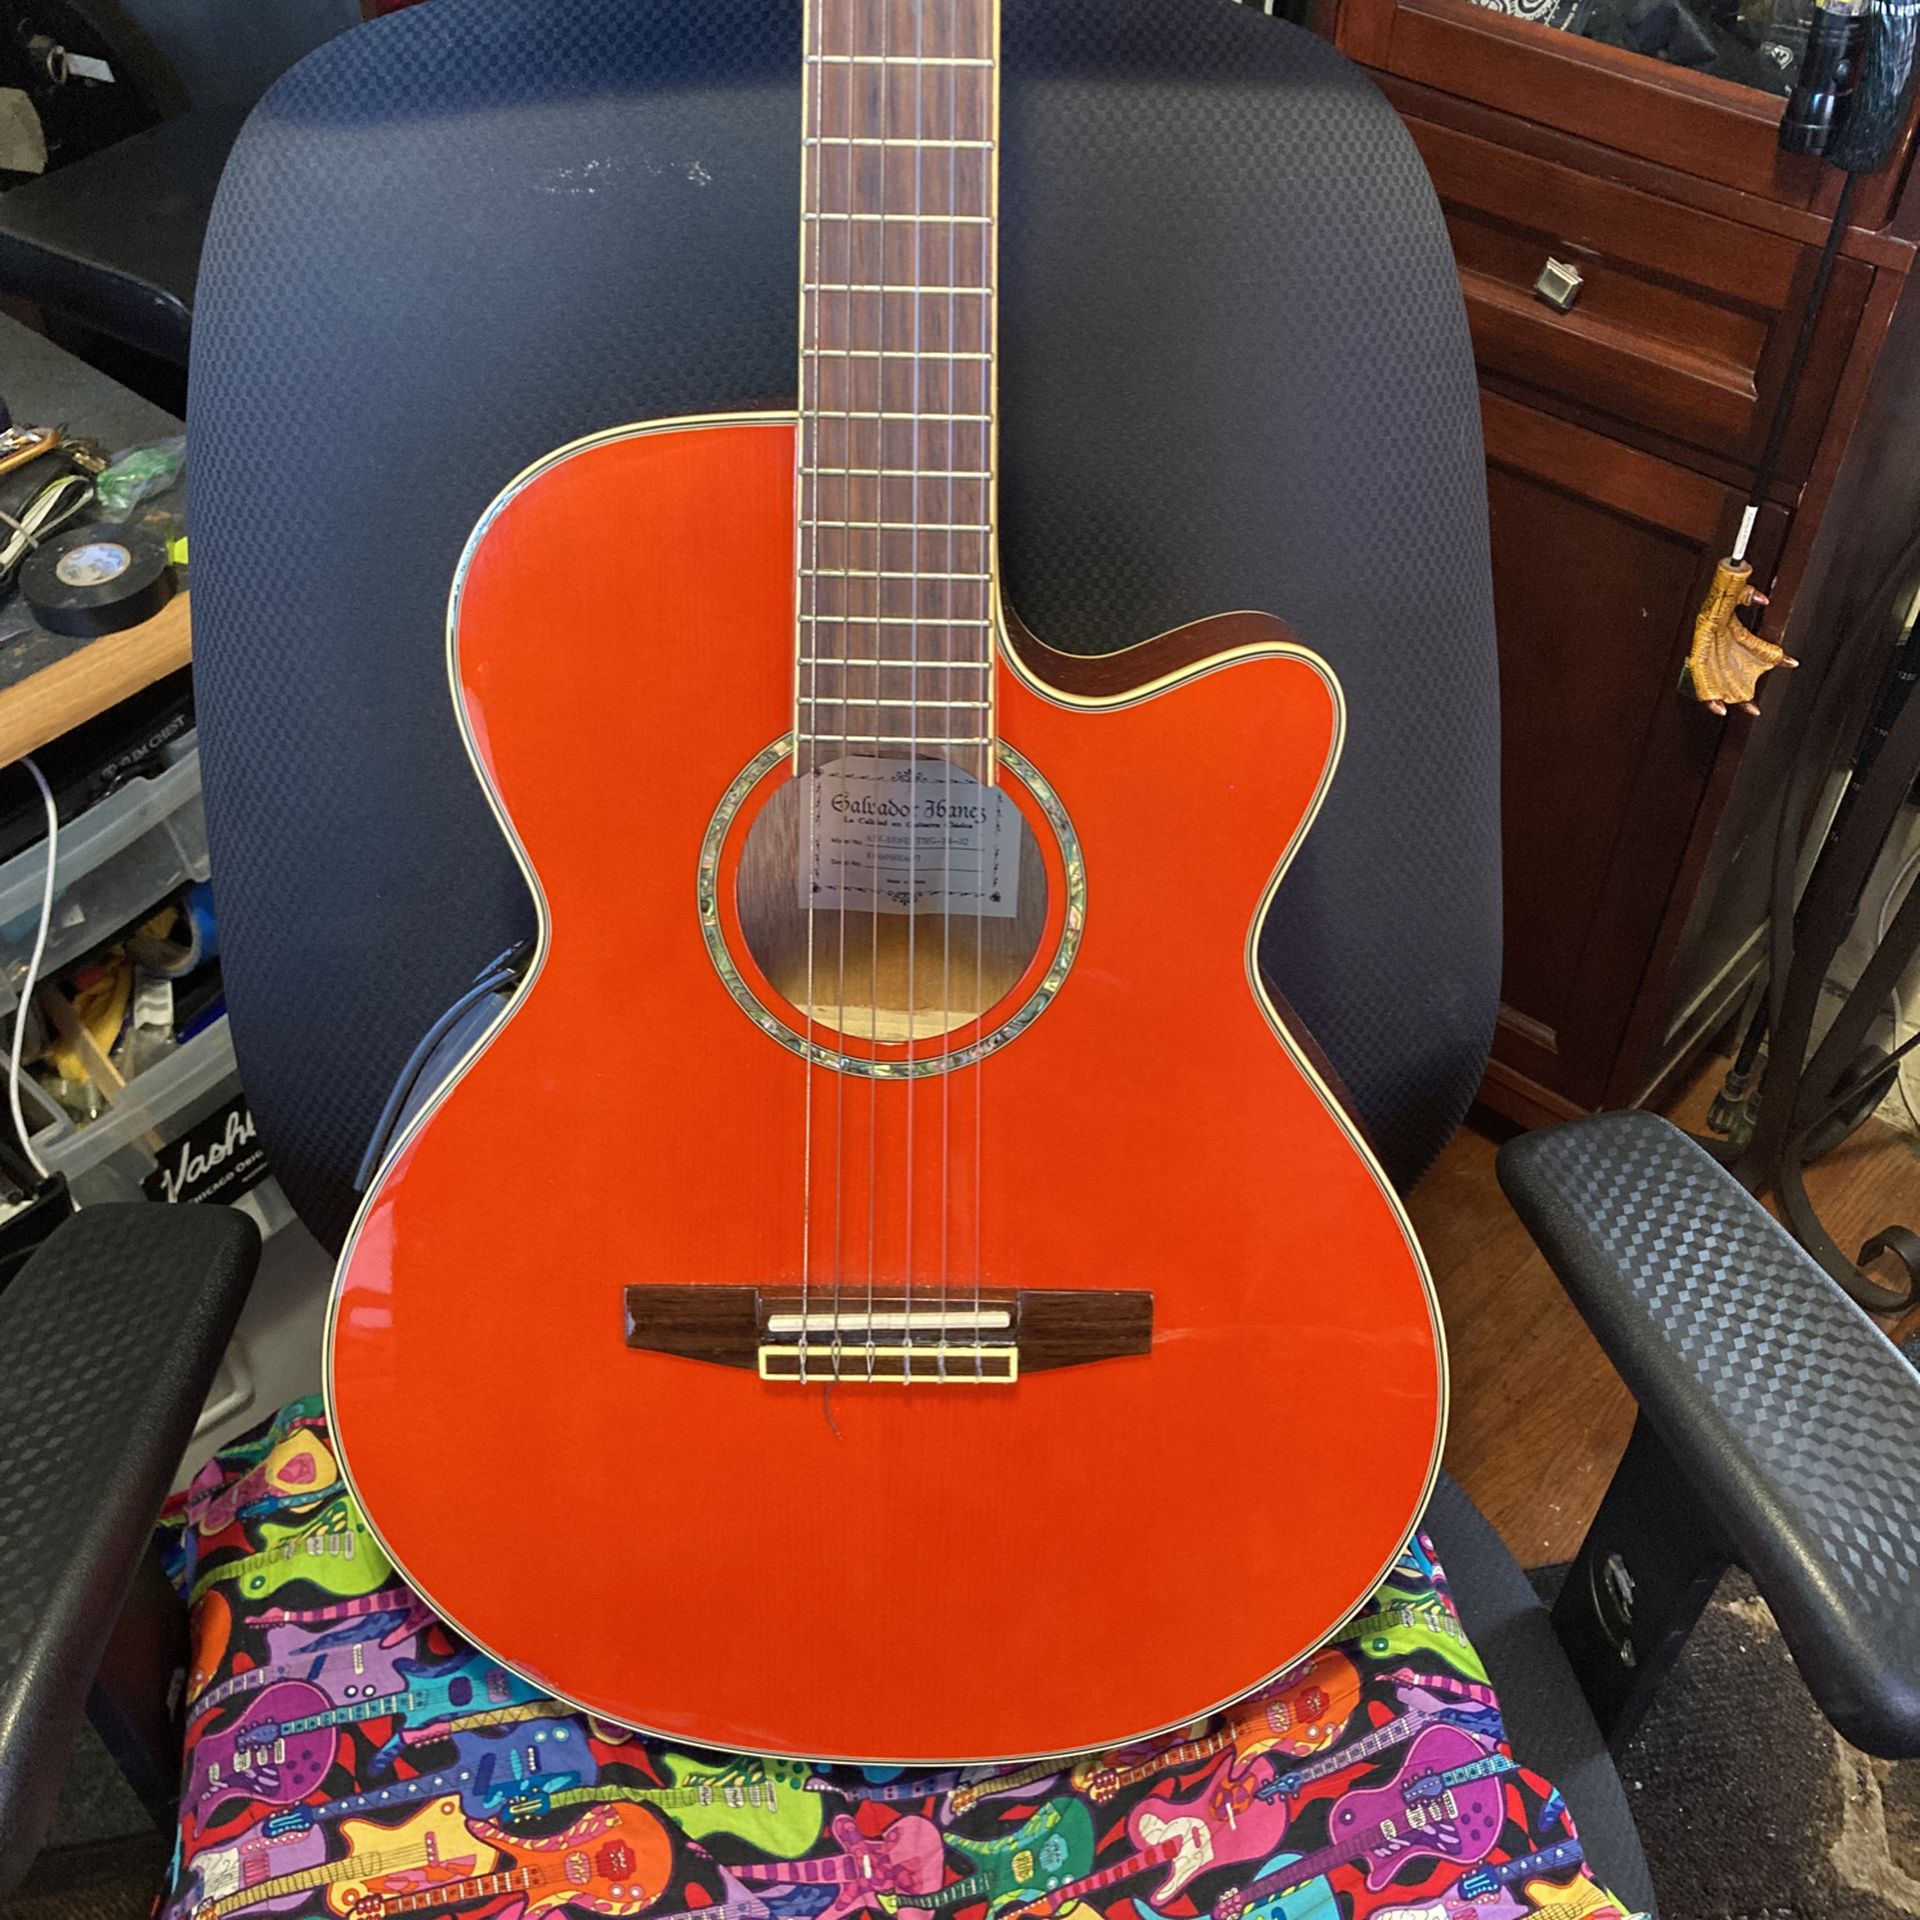 Ibanez classical electric guitar